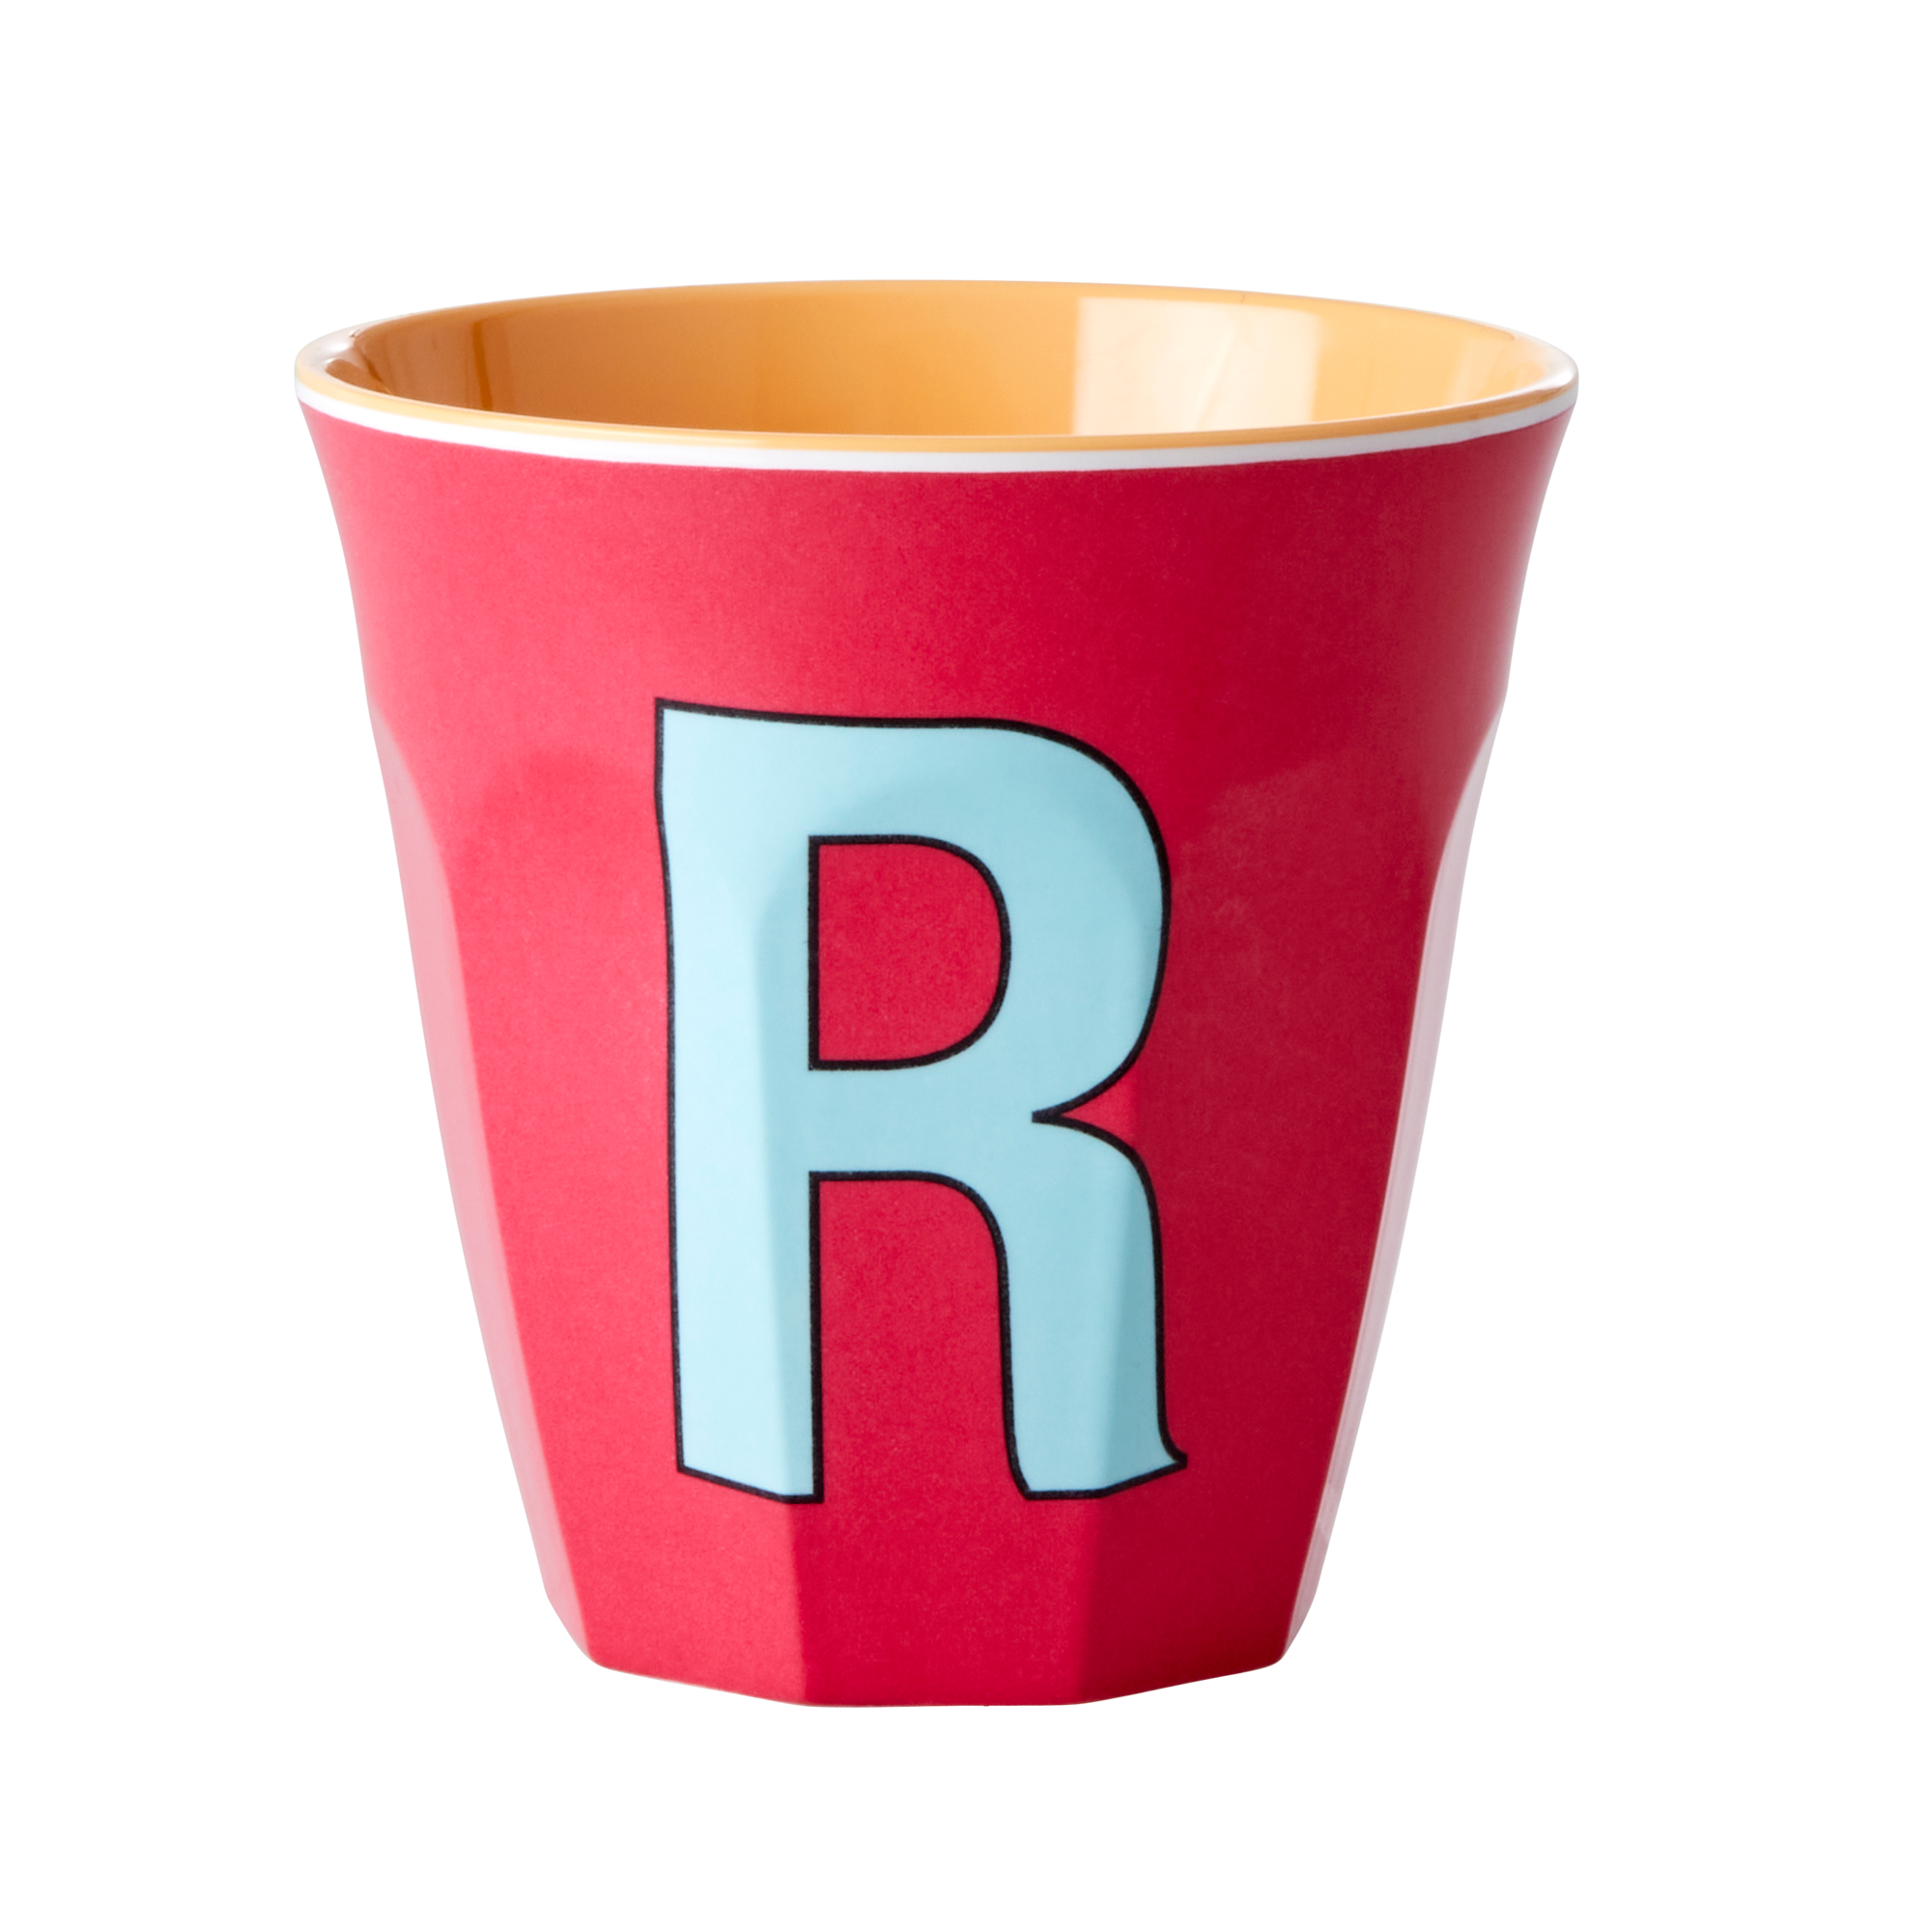 Melamine cup by Rice by Rice in the colors red, light blue and orange with the letter "R"